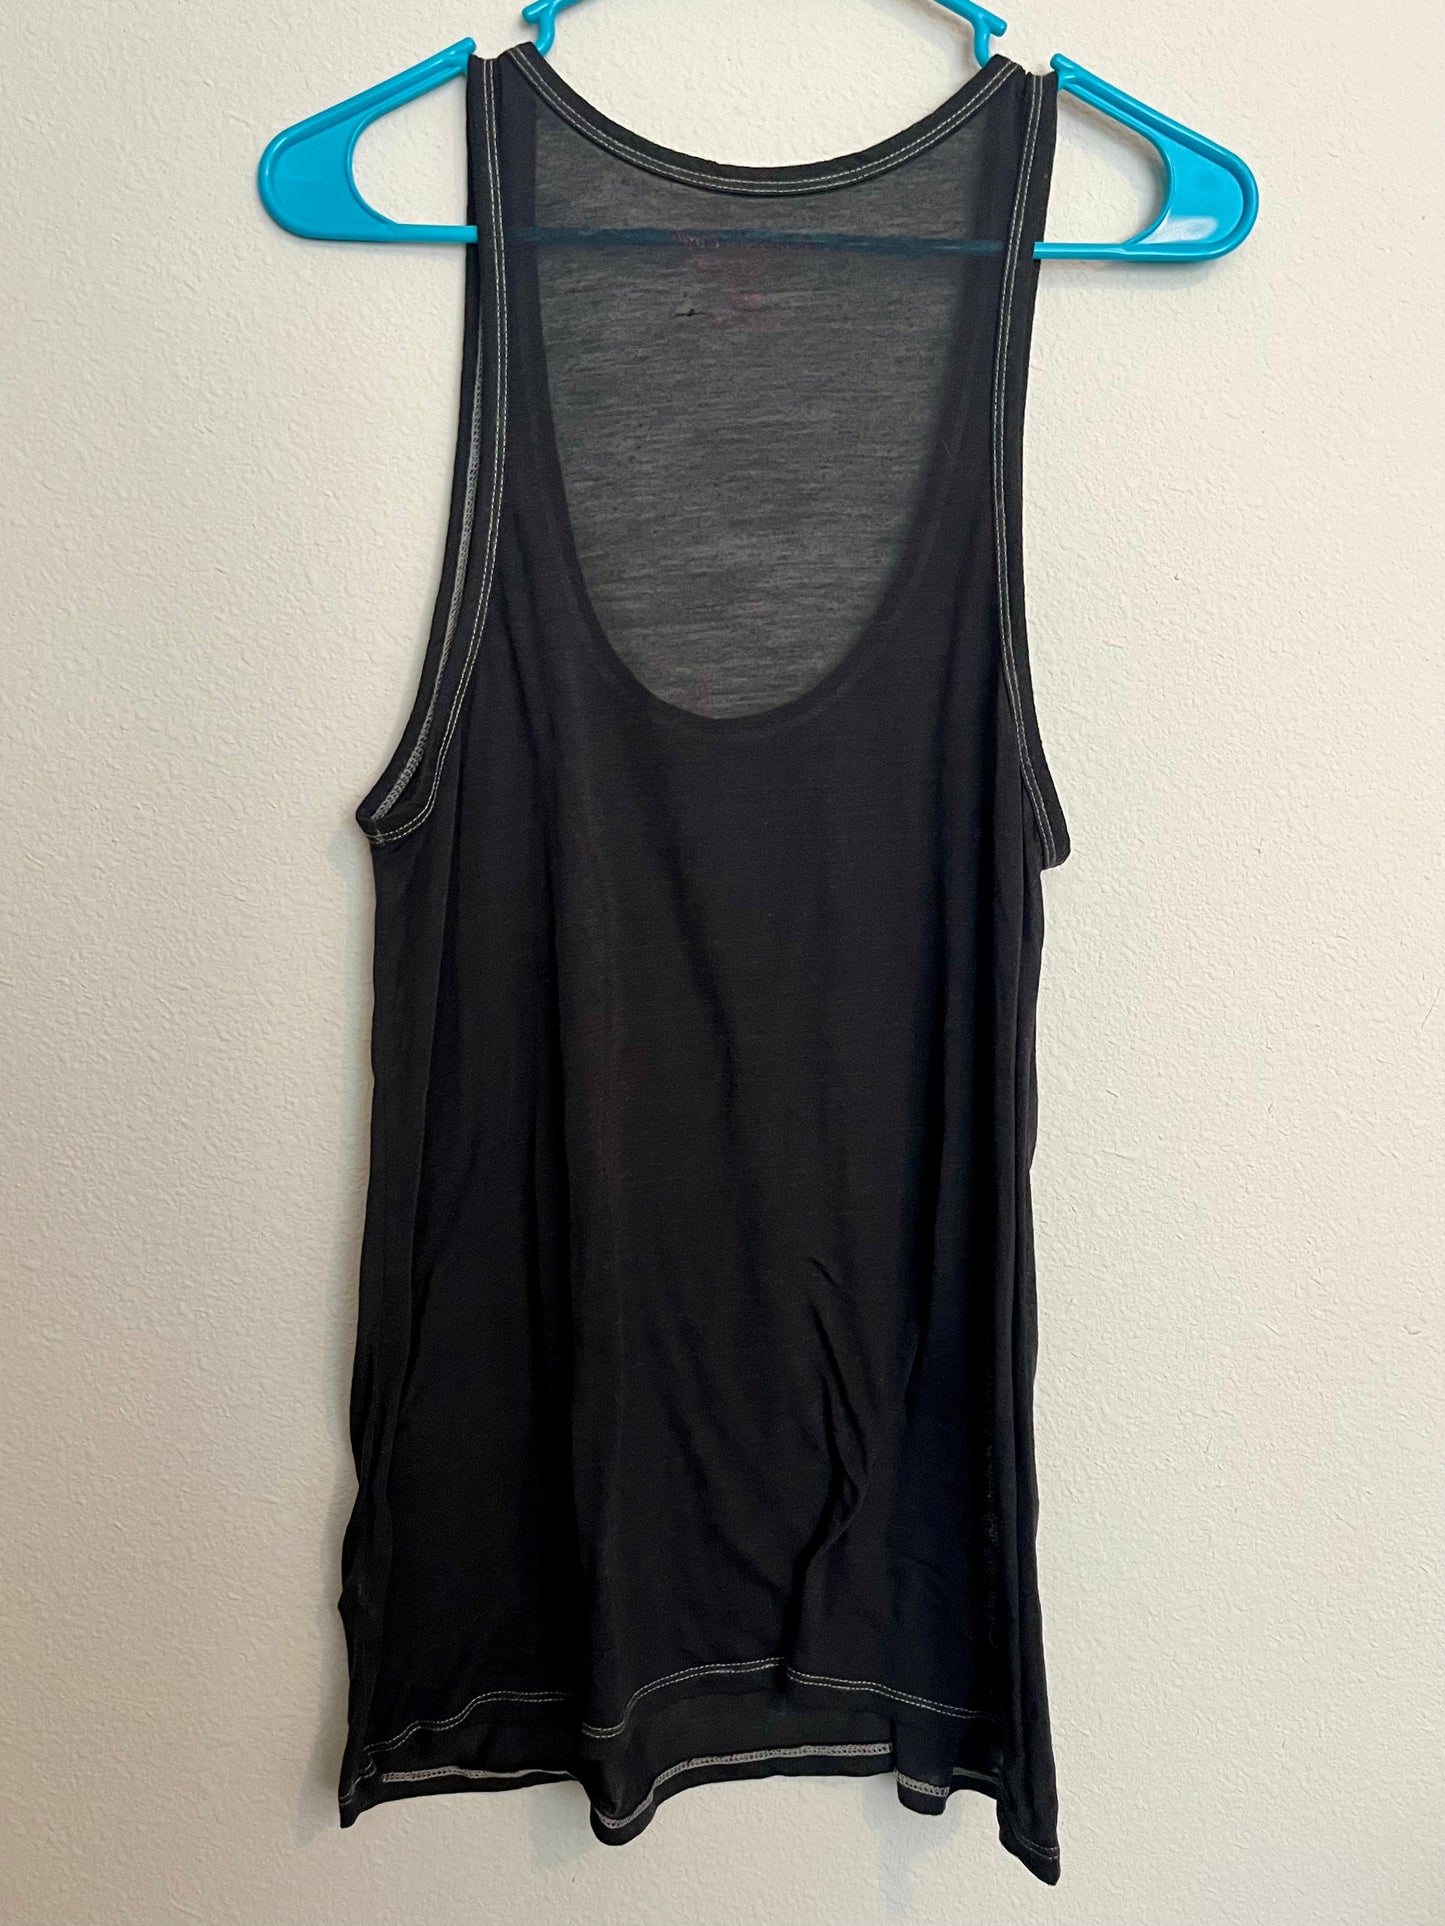 American Eagle Sheer Tank Top, Size Medium - Tales from the Tangle